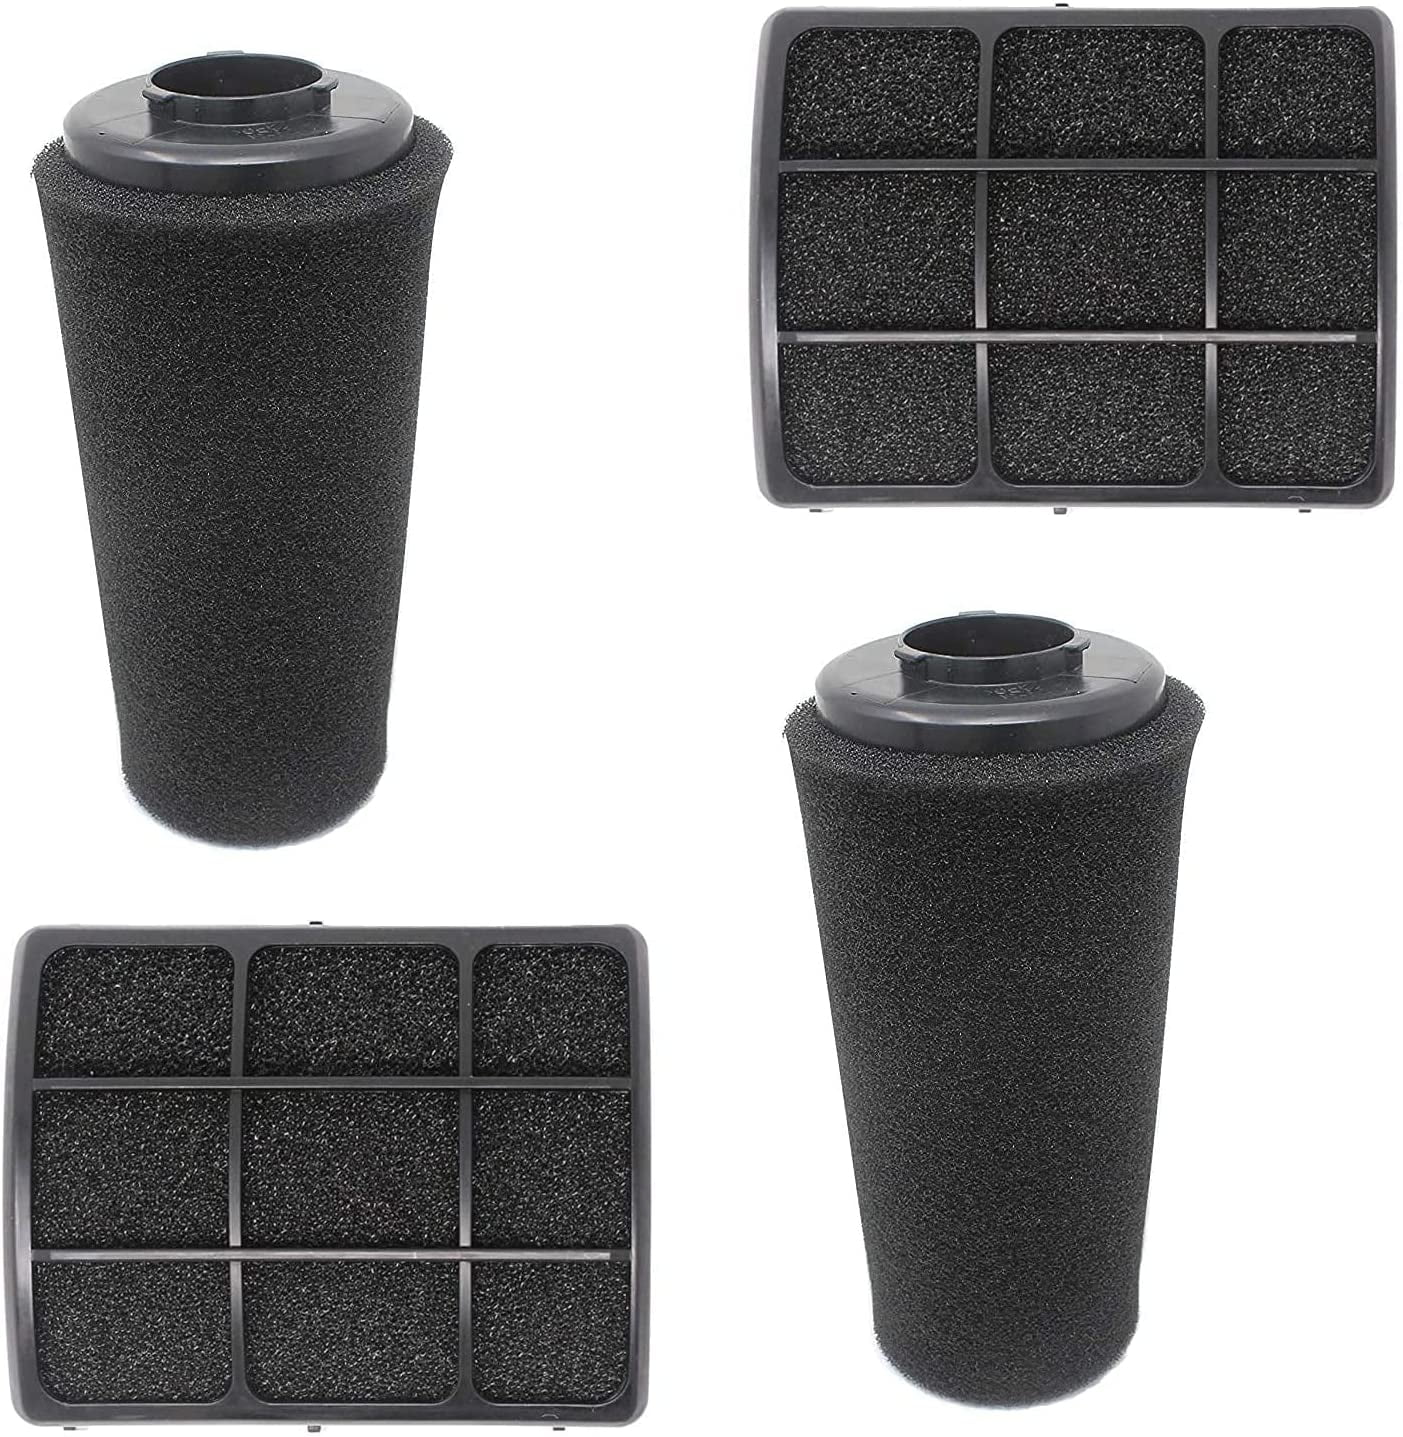 2-Pack Exhaust Odor Trapping Filter for Dirt Devil Endura Max Razor Series 